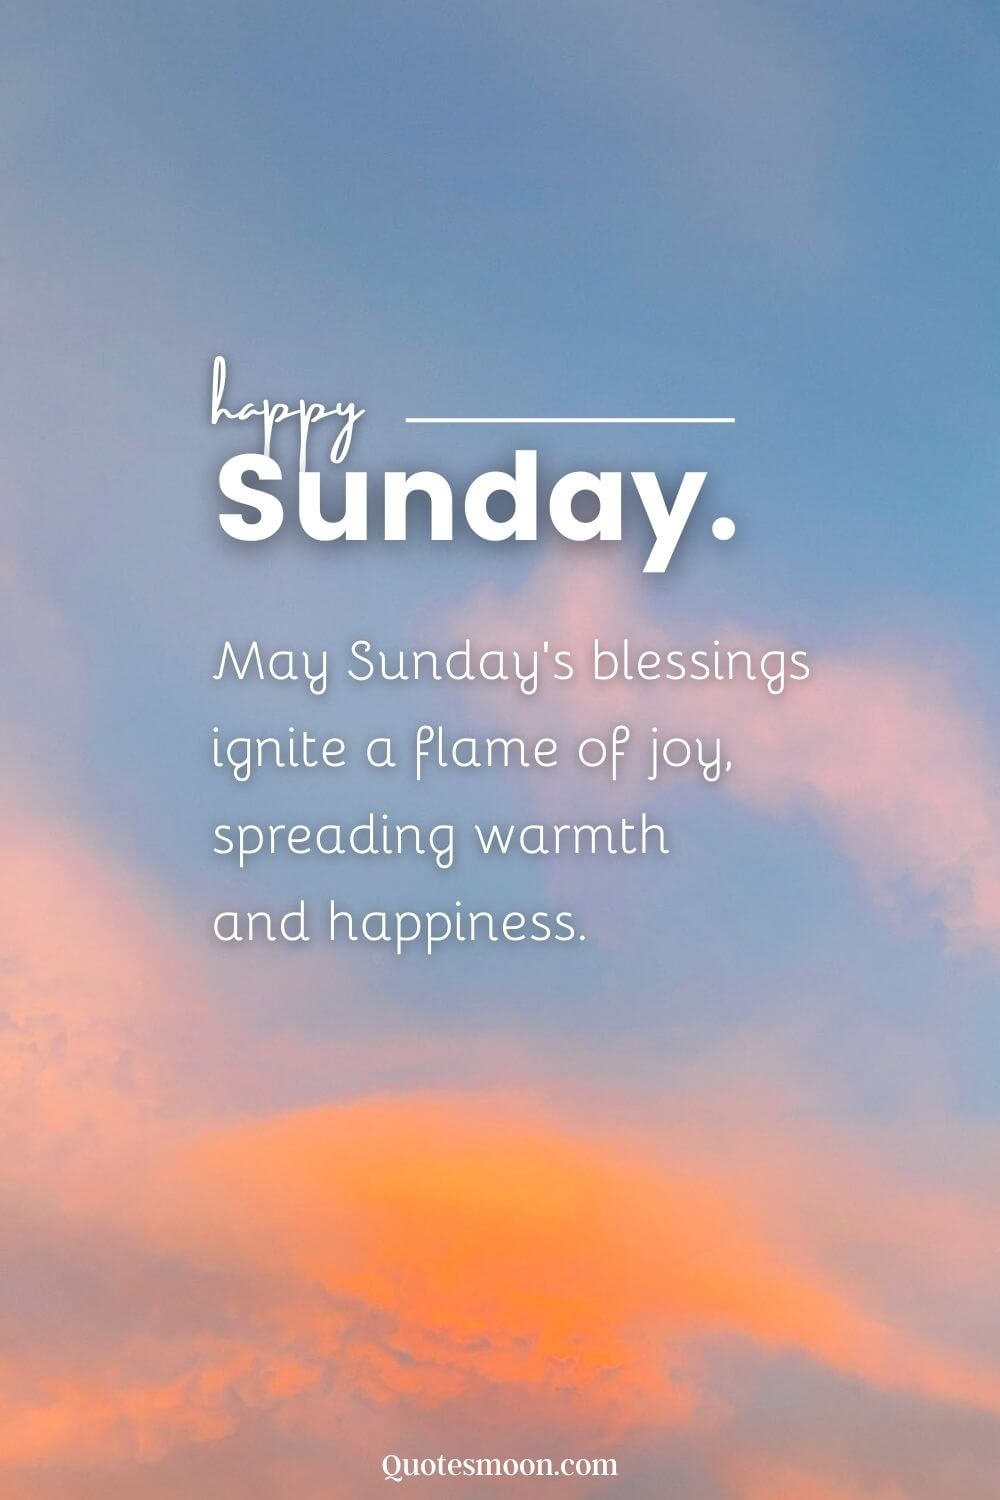 sunday good quotes for blessing images latest